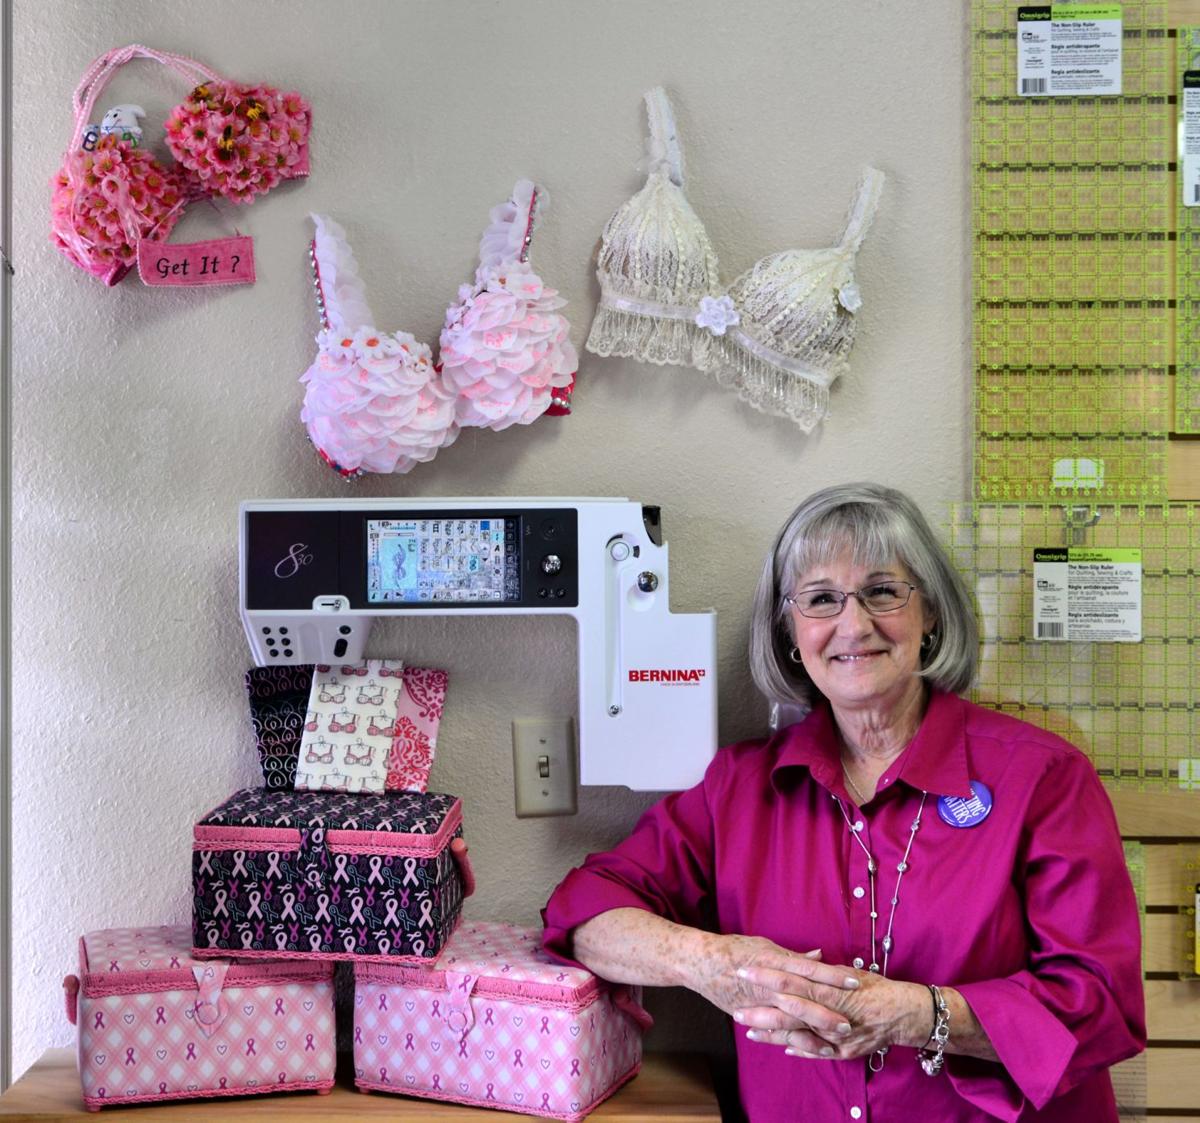 Bras on display in Kent raise cancer awareness and help women in need